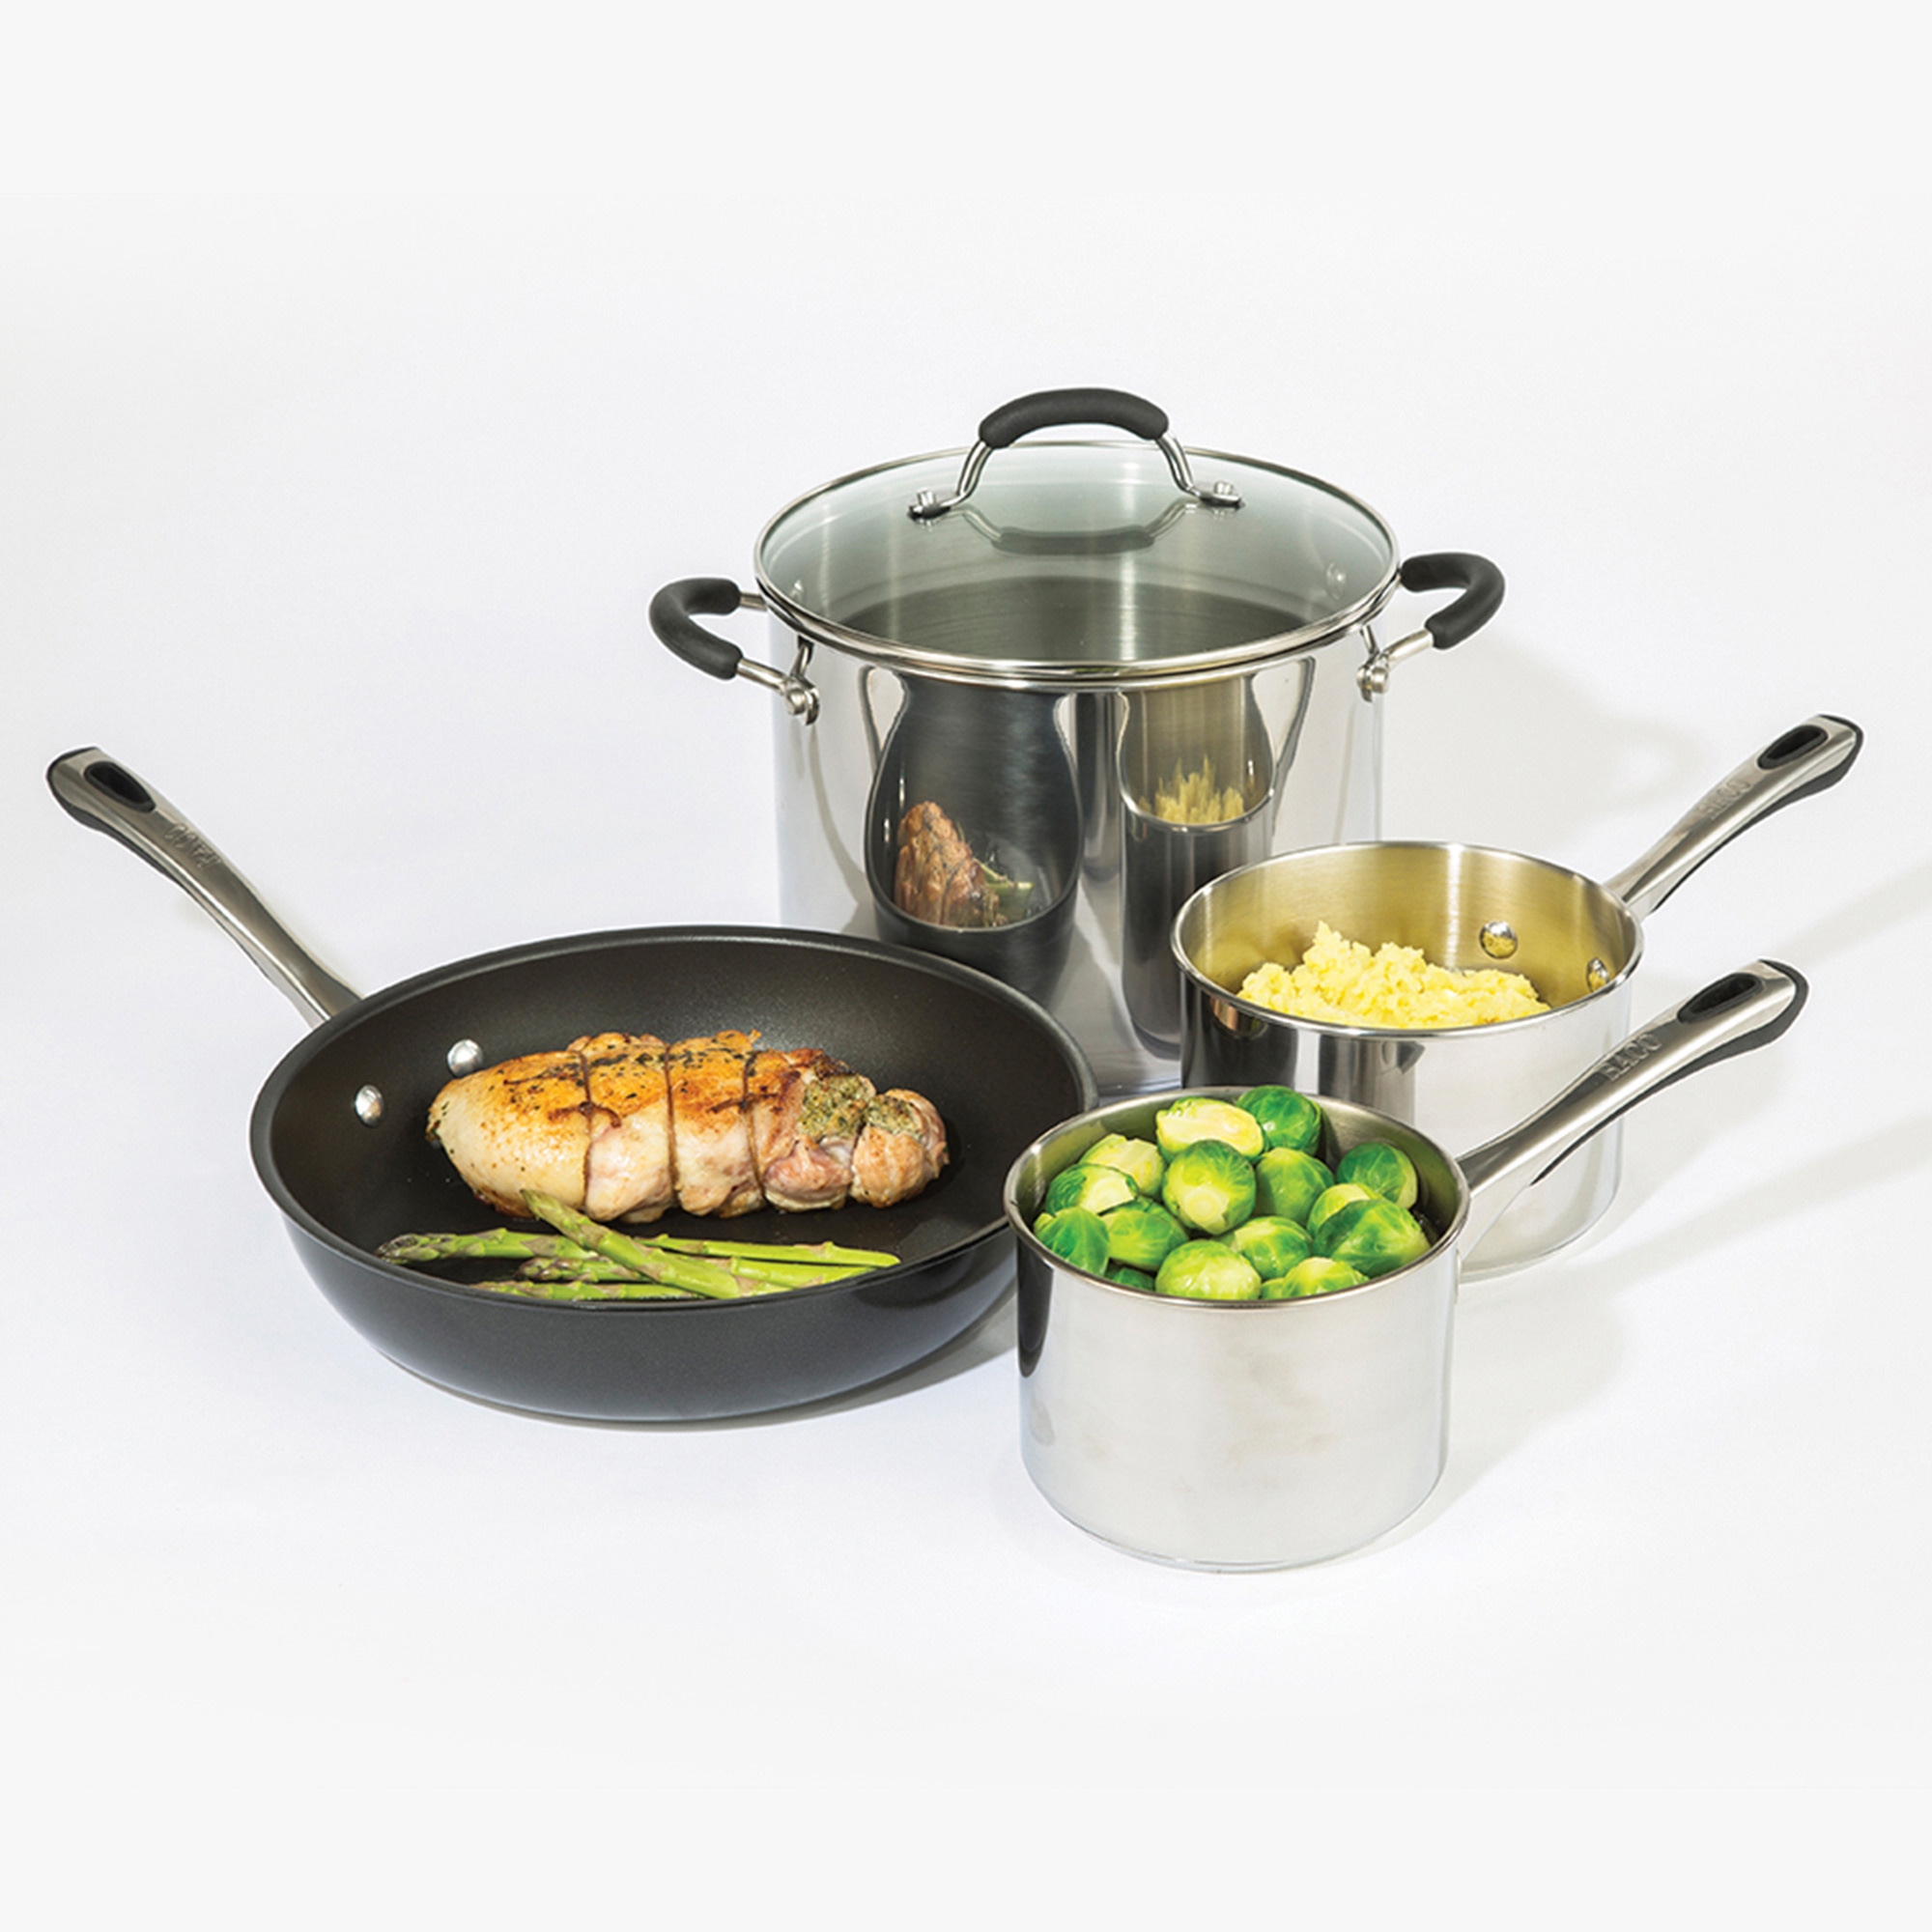 Raco Contemporary Stainless Steel Saucepan 14cm - 1.4L Image 2